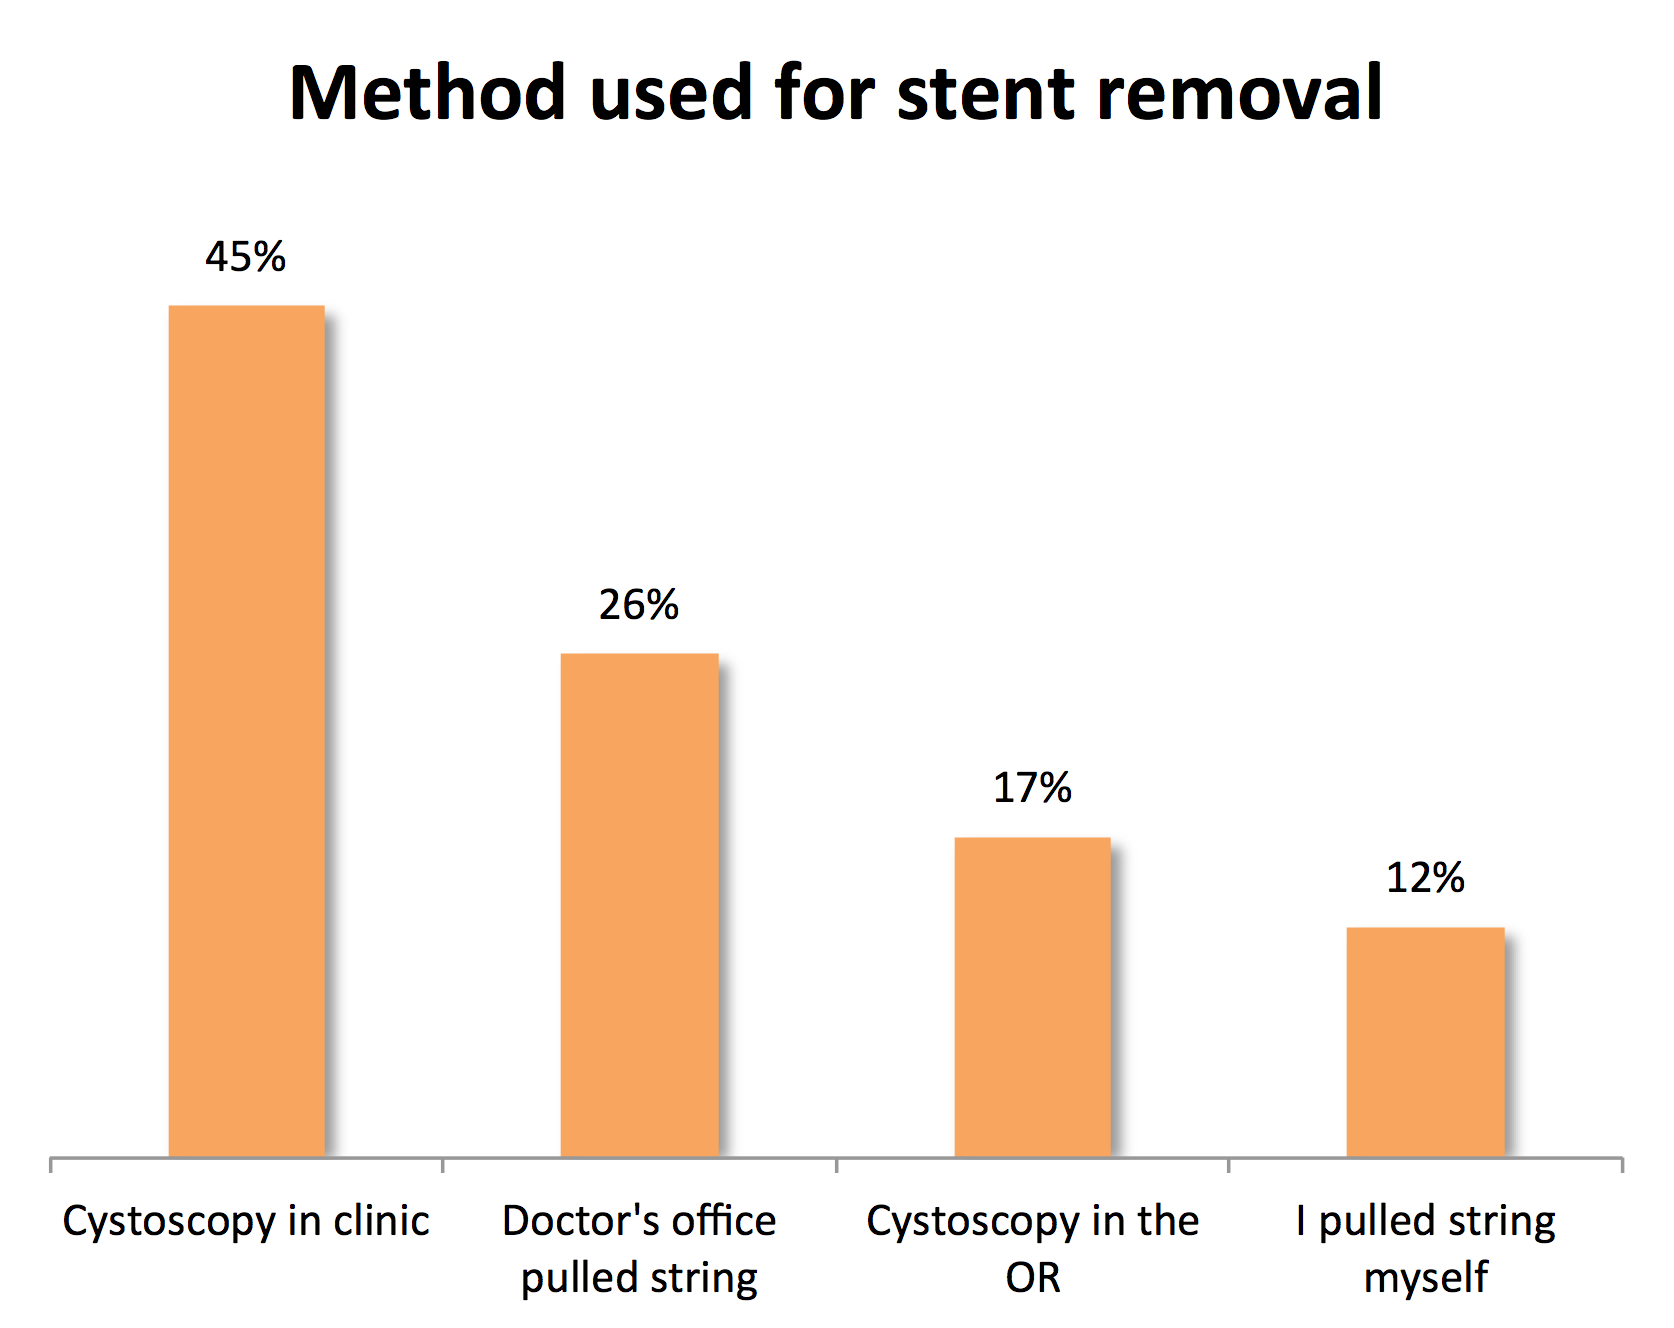 What is the recovery time after a ureteral stent?